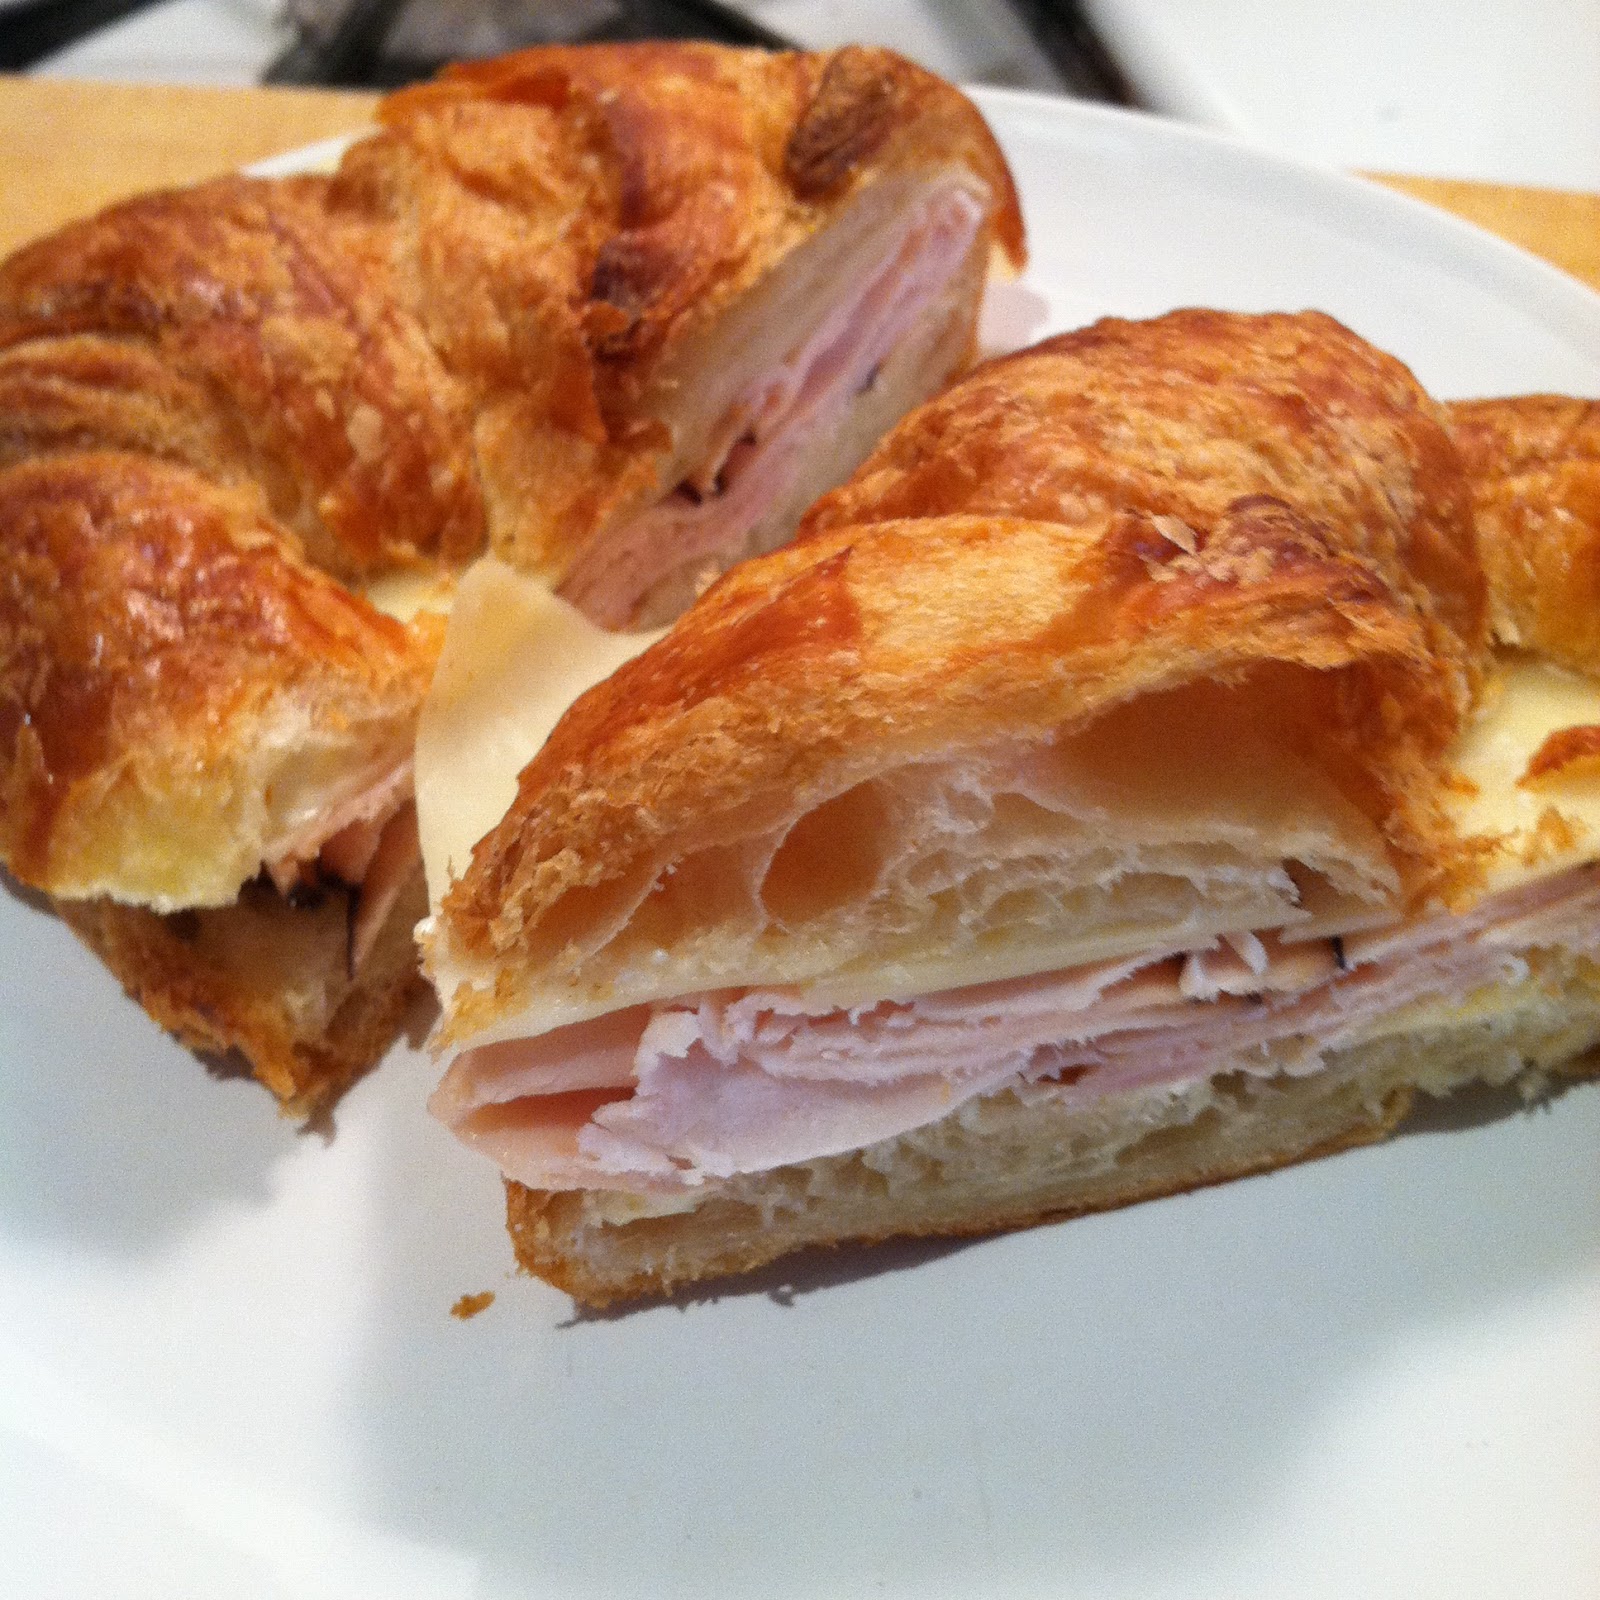 Quest for Delish: Turkey and Swiss on a Croissant